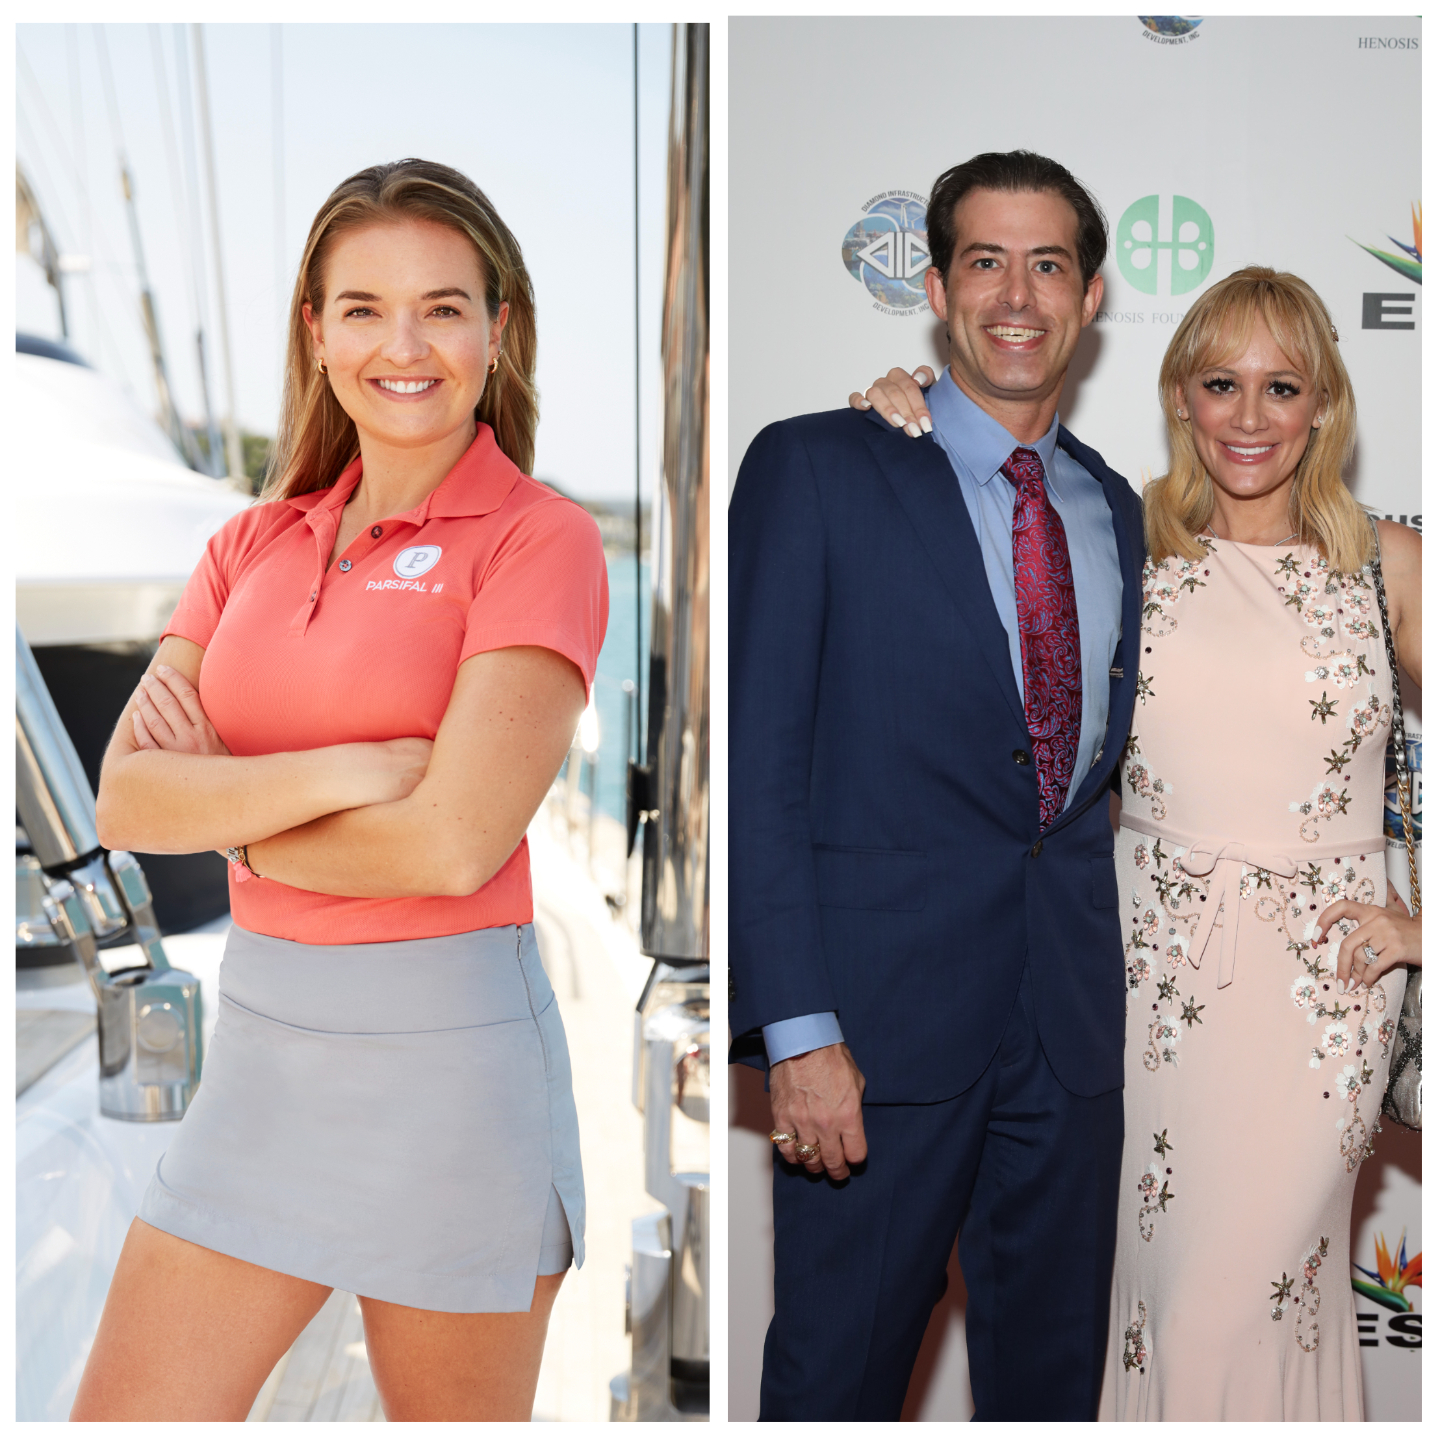 ‘Below Deck’ Tip Disaster: Charles Sanders and Erica Rose Paid $6,500 Tip in Coins, Daisy Kelliher Spills [Exclusive]